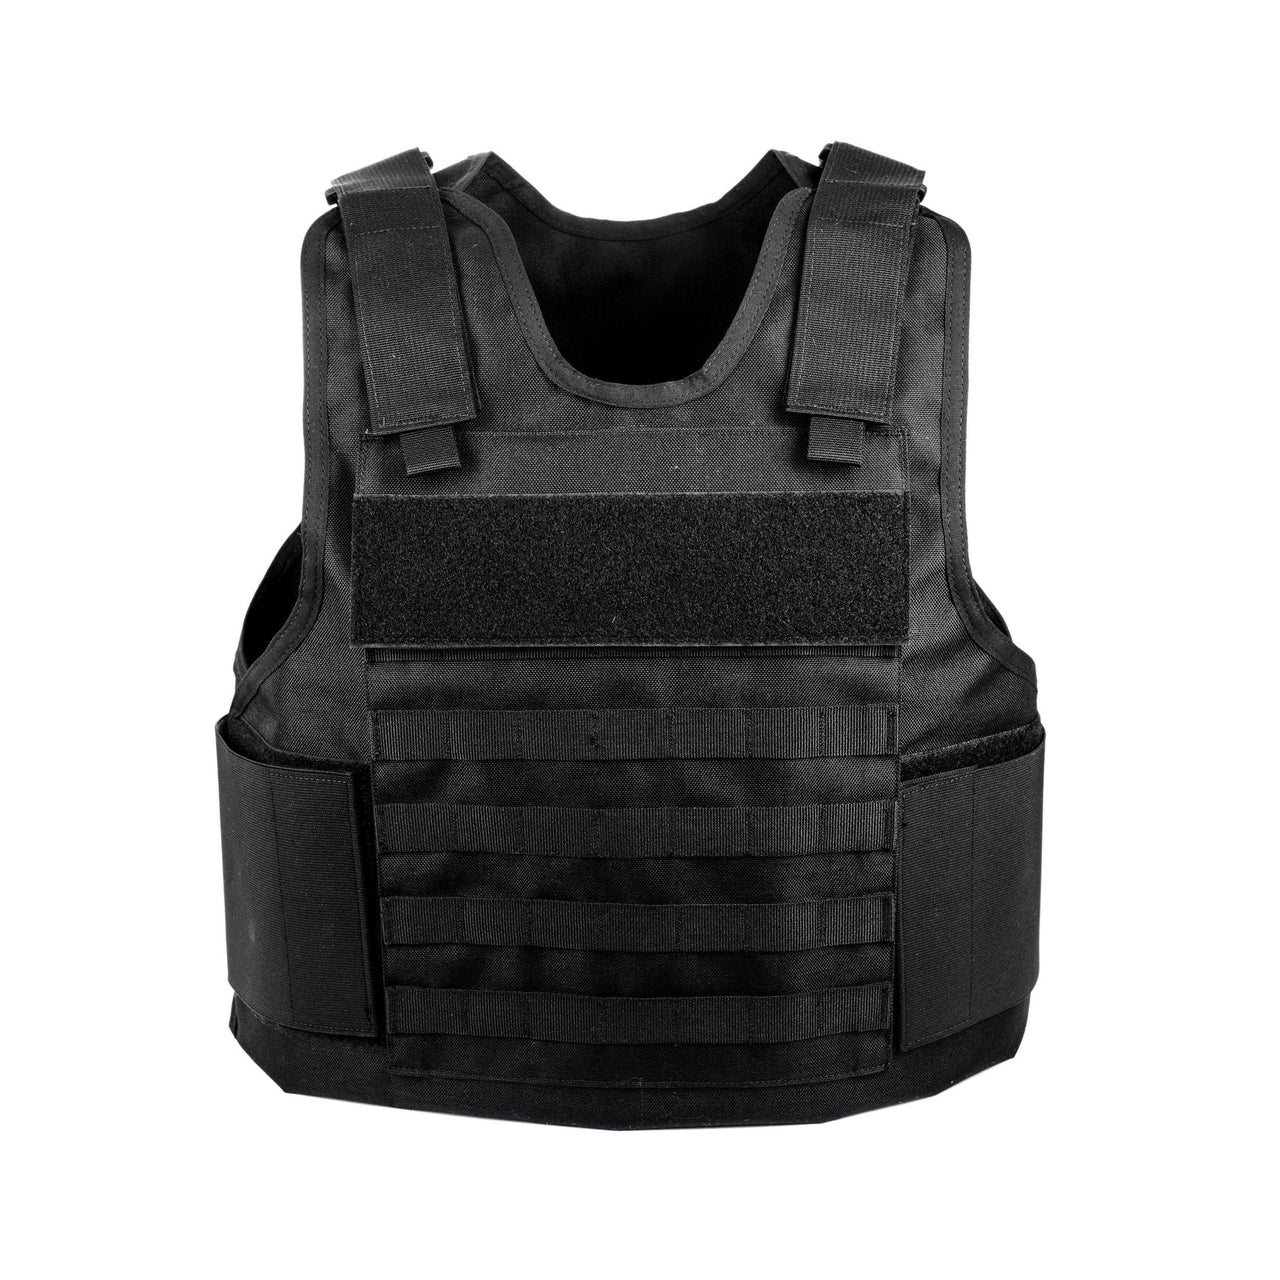 A black Body Armor Direct All Star Tactical Enhanced Multi-Threat Vest on a white background.